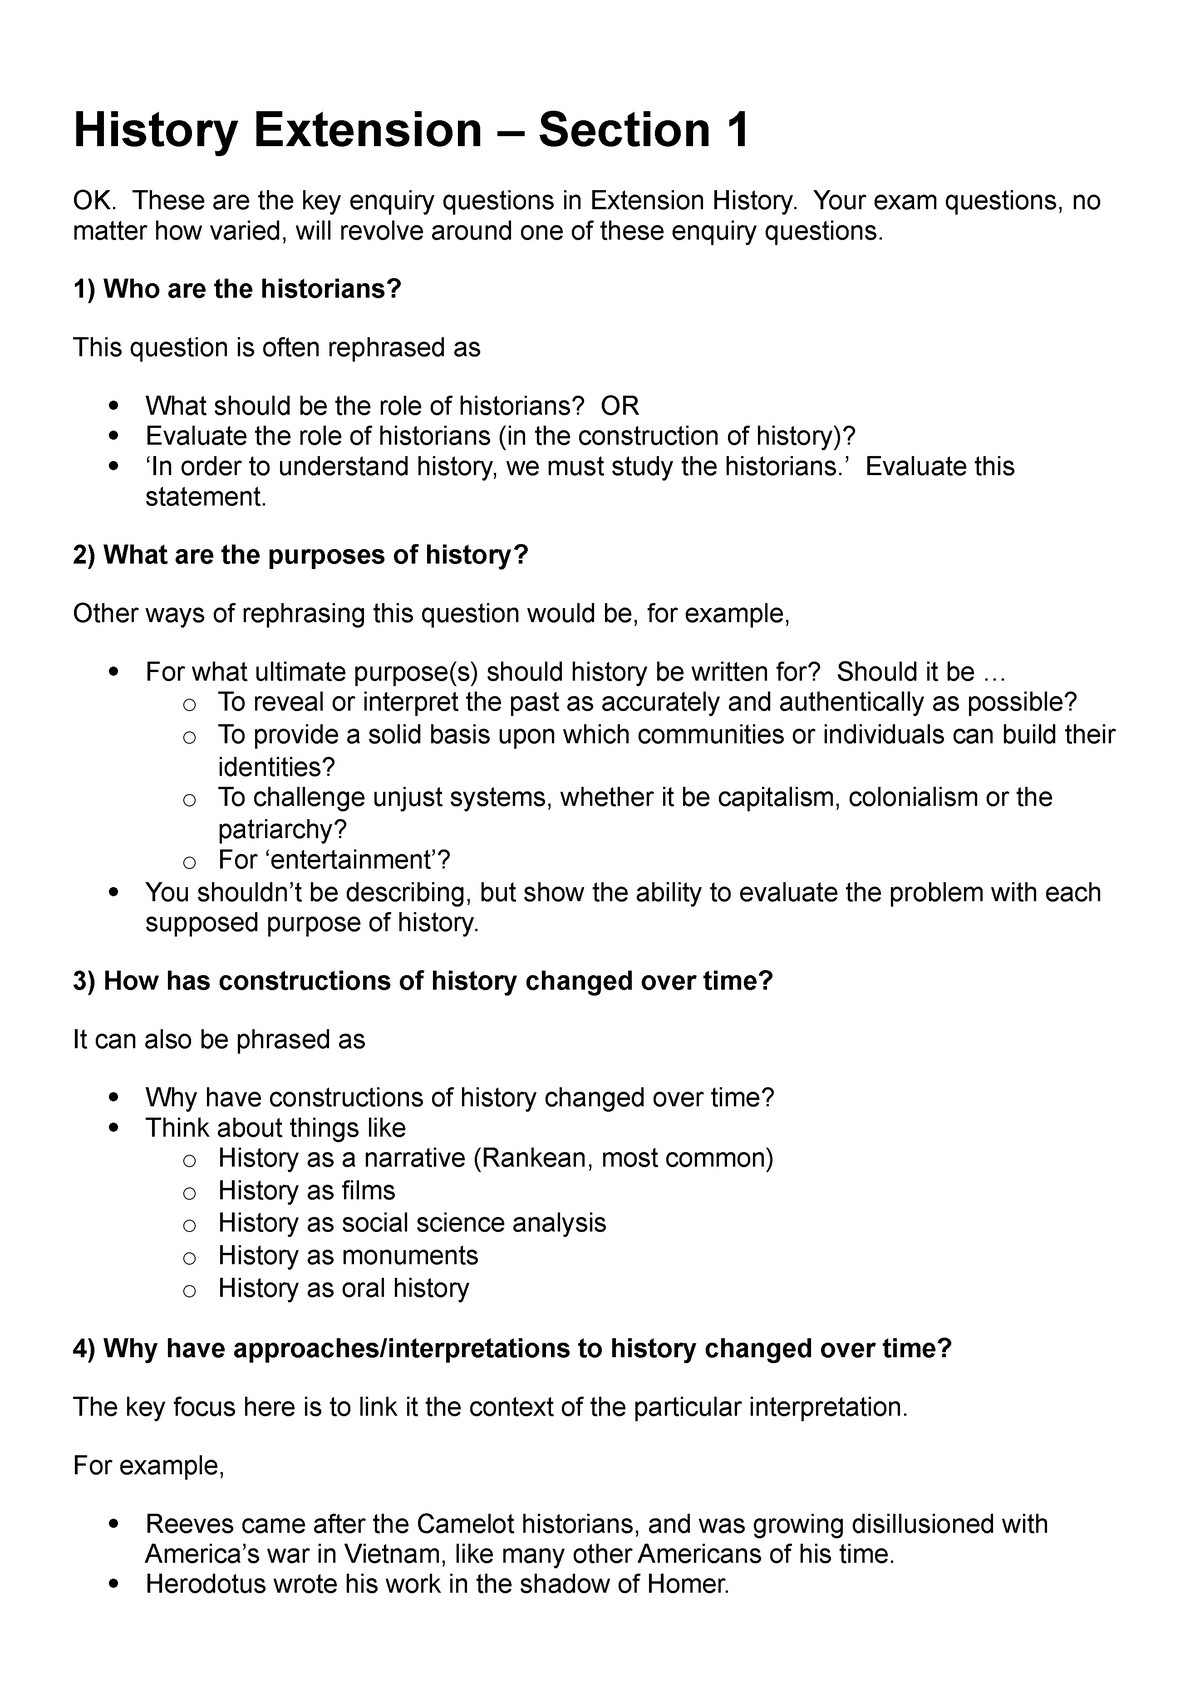 history extension essay prize